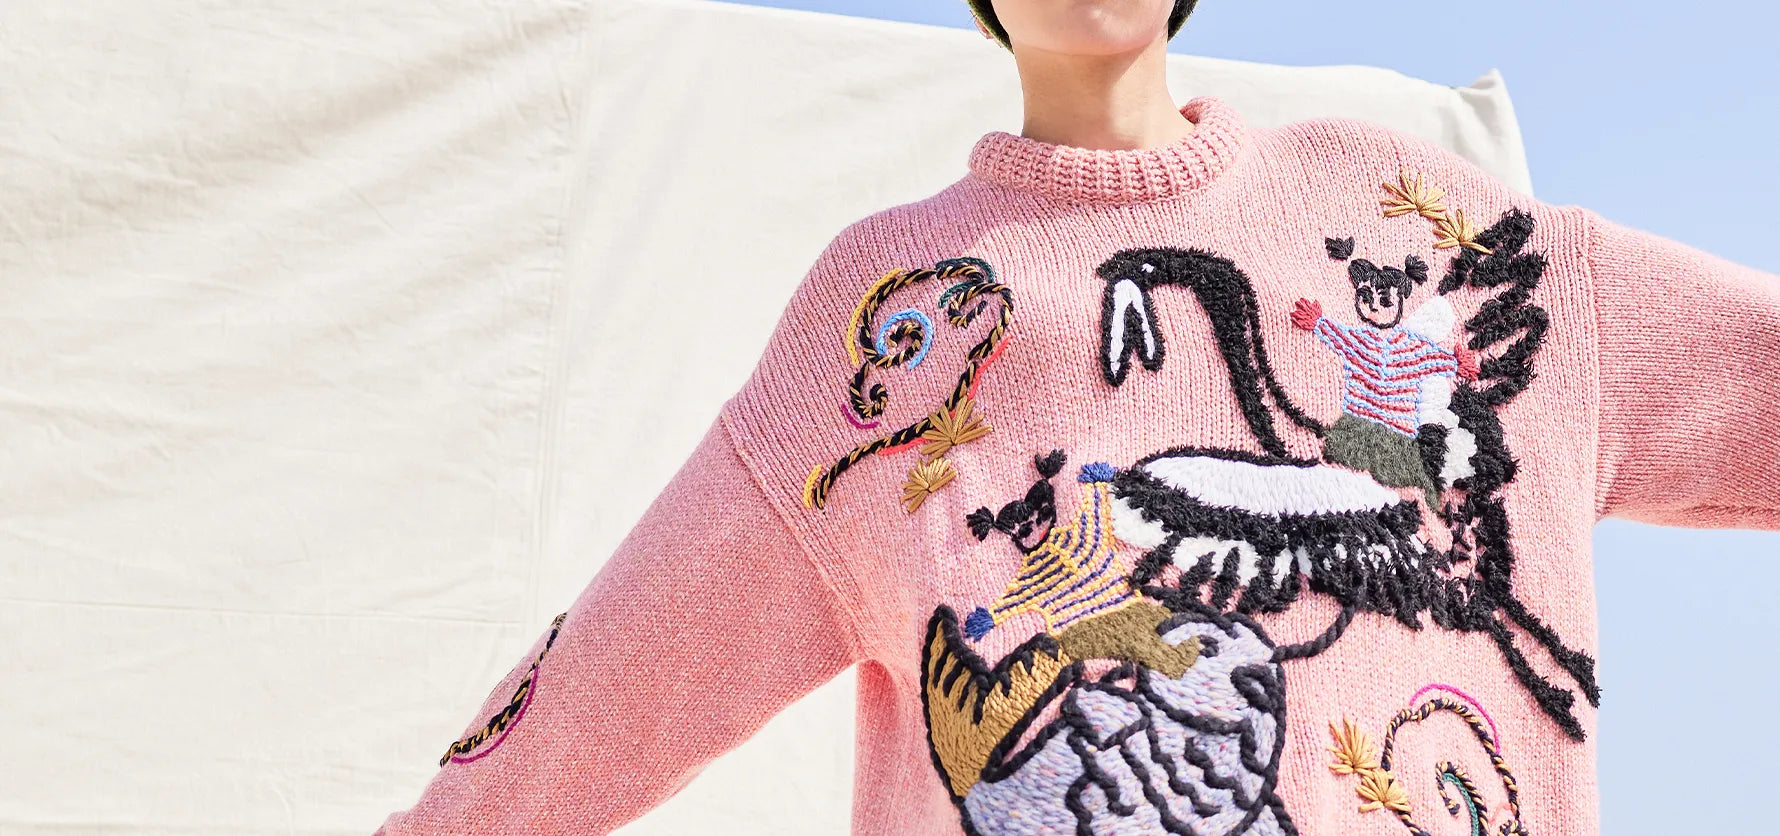 Newly Launched Yan Yan Is a Hong Kong-Based Knitwear Label to